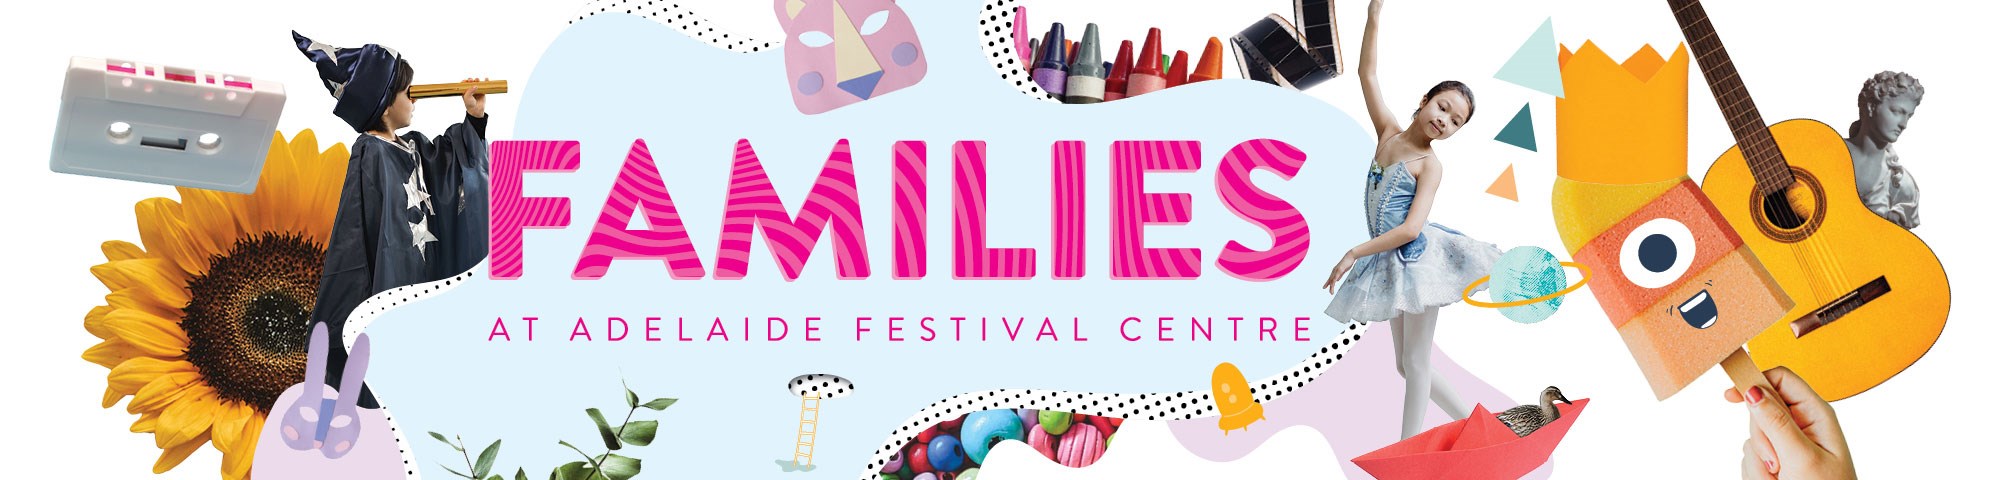 families at adelaide festival centre